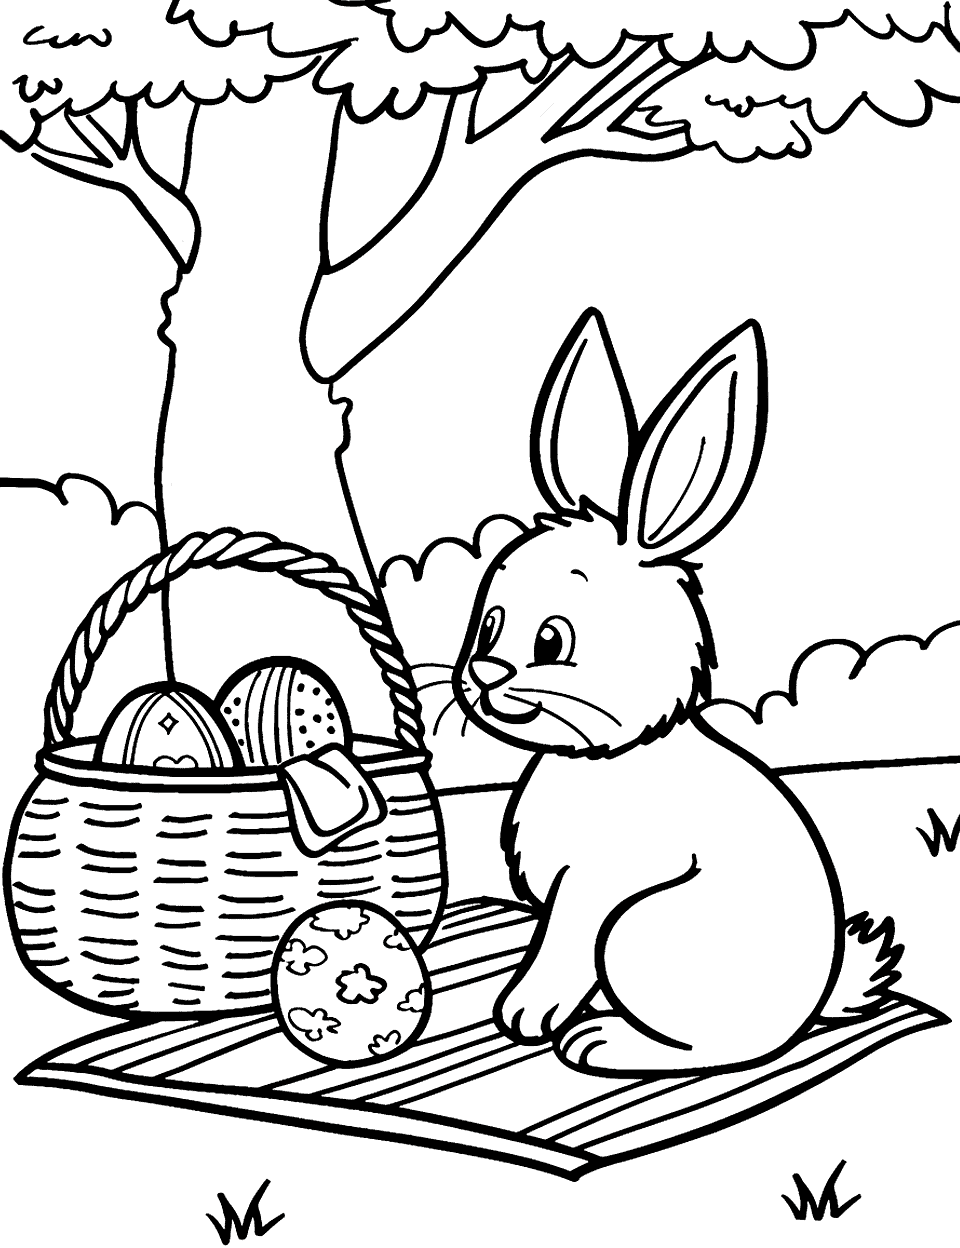 Picnic with a Bunny Easter Coloring Page - A simple picnic scene with a bunny sitting next to a picnic basket in a park, with Easter eggs next to it.